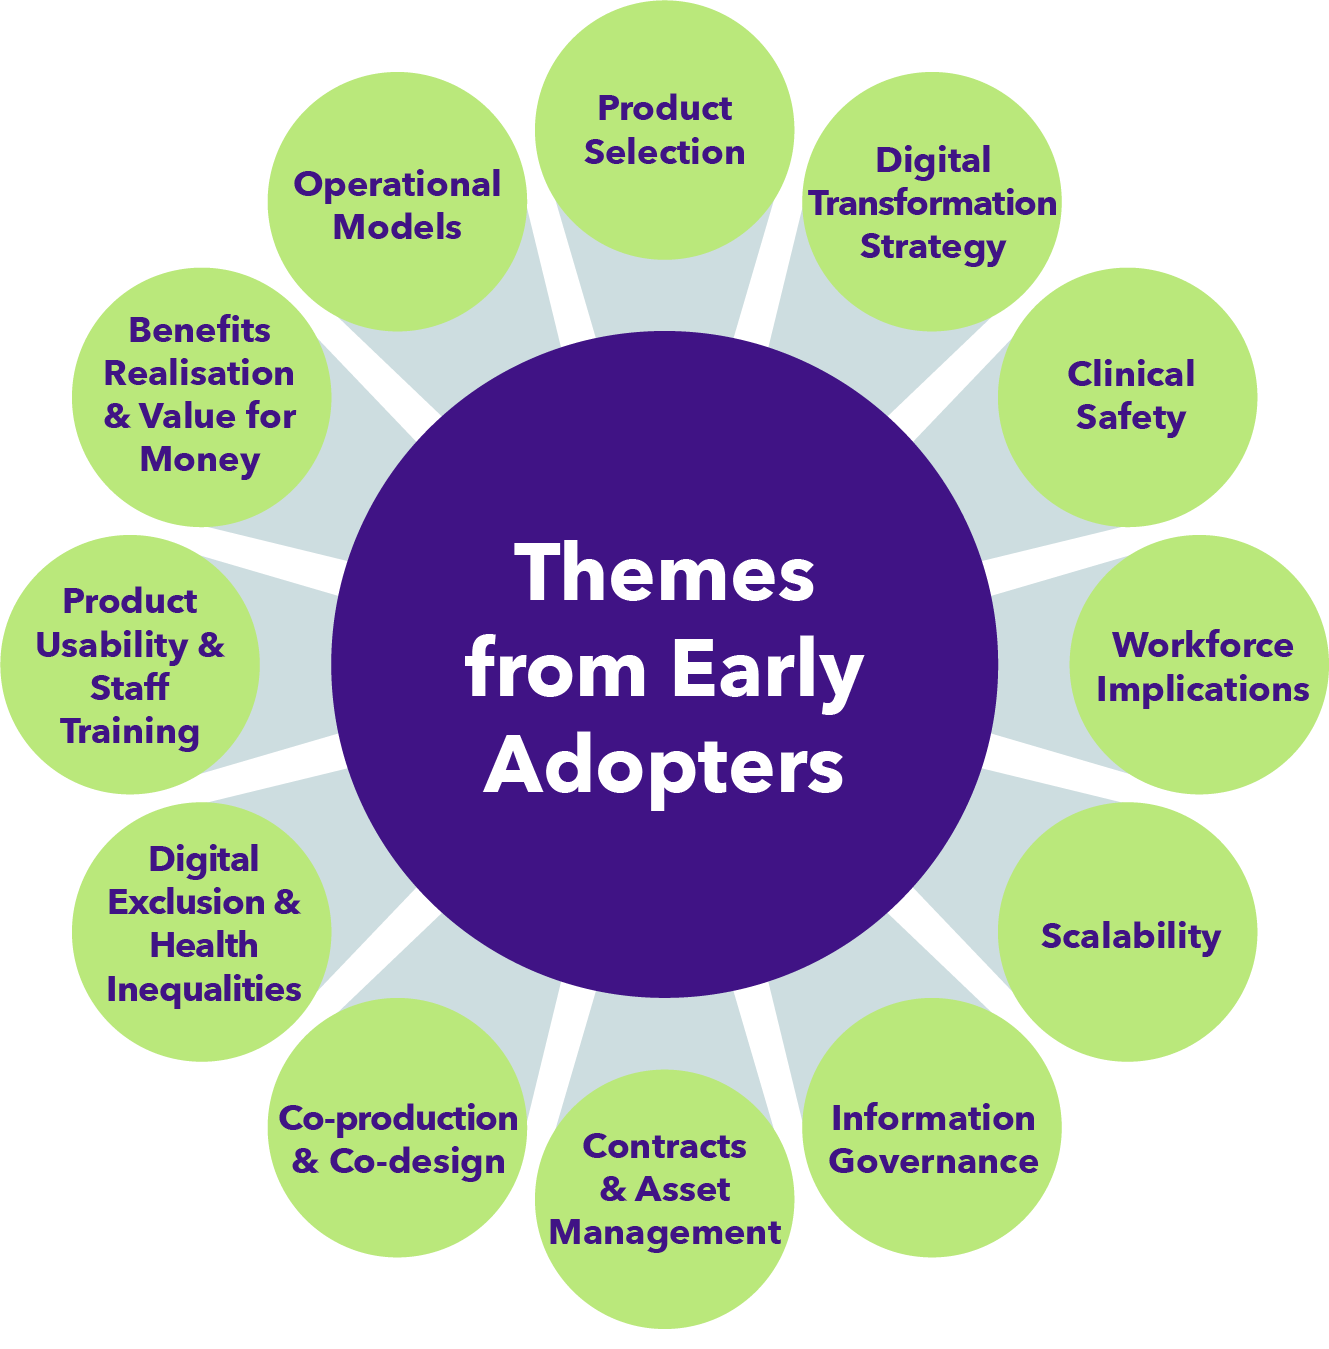 Theme from Early Adopters